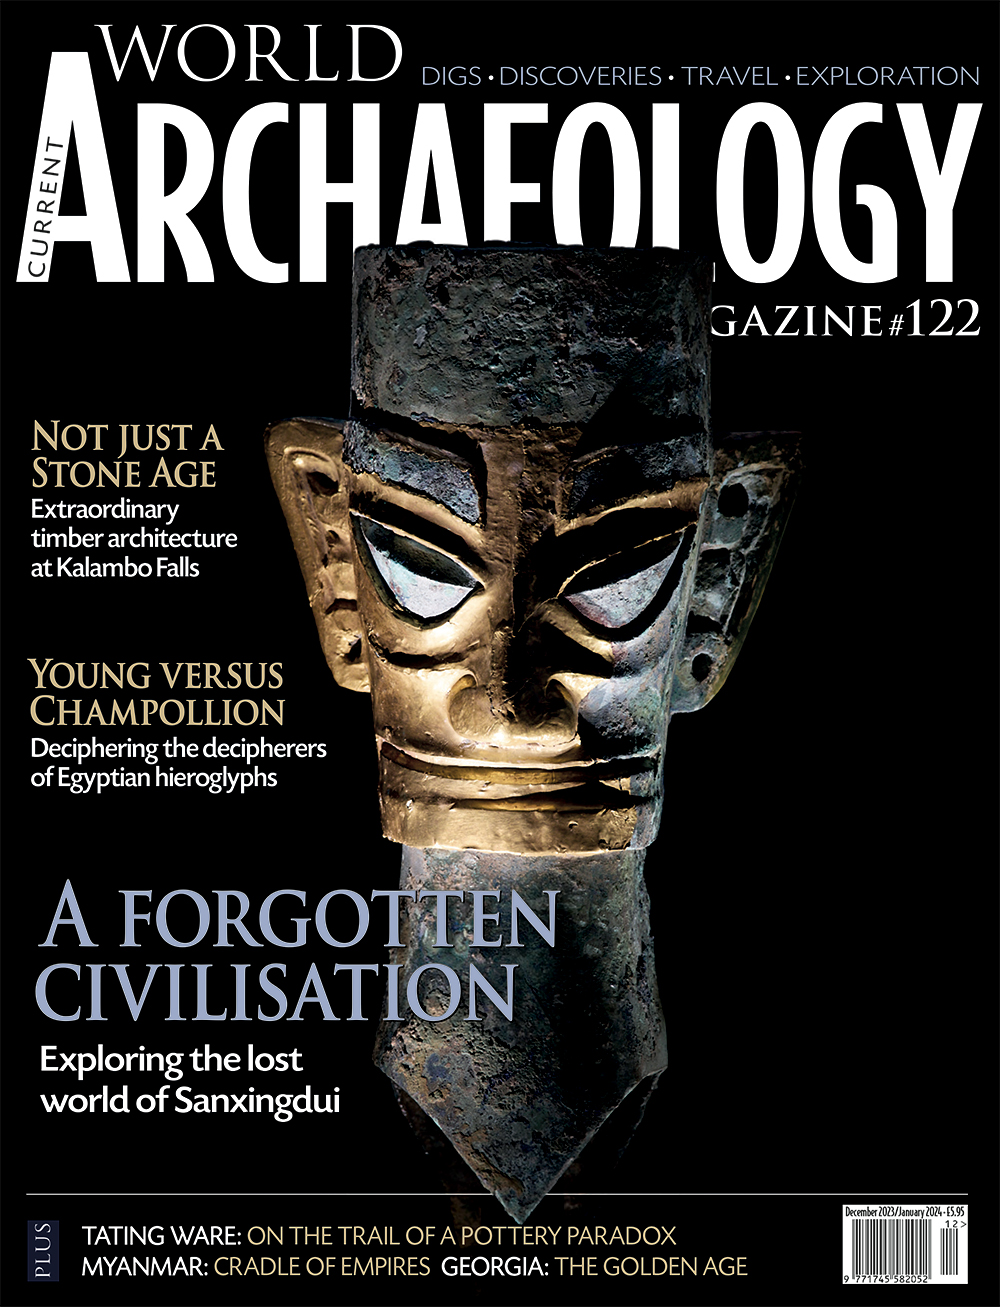 Current World Archaeology issue 122